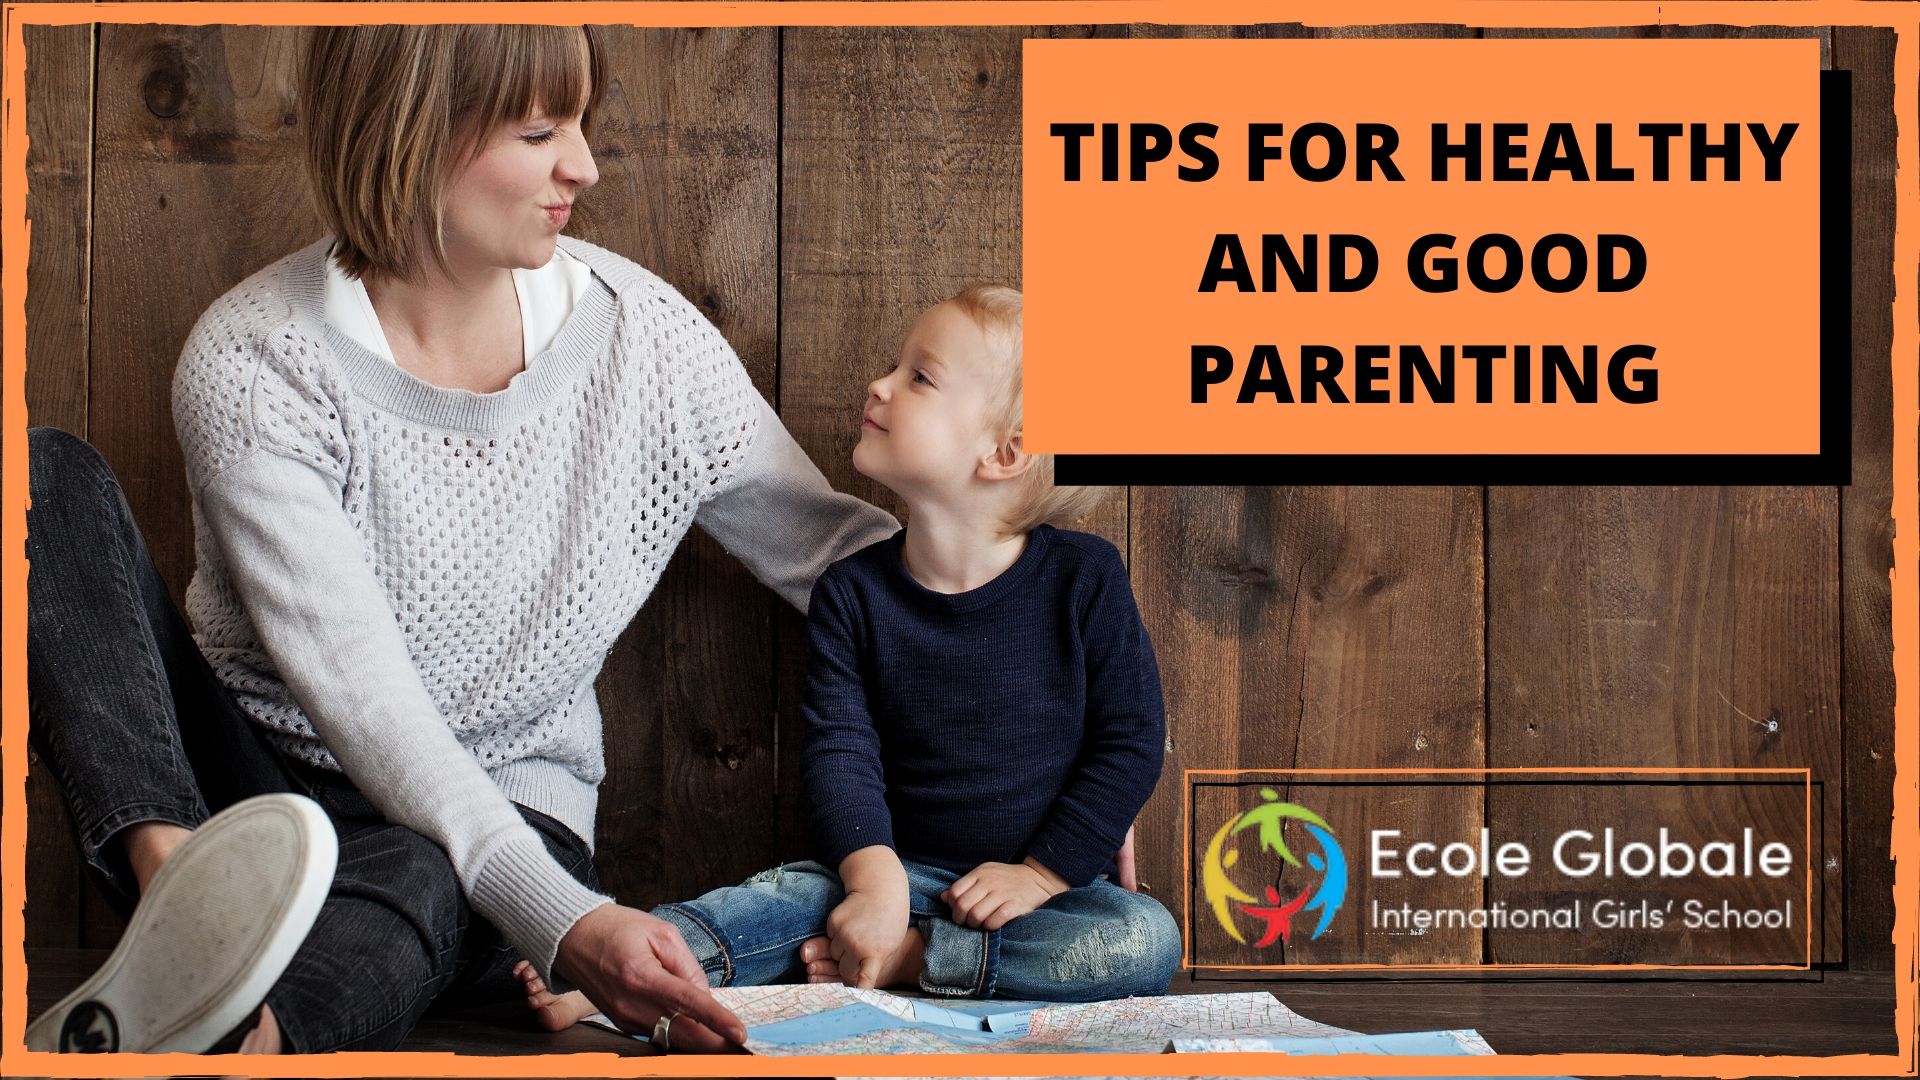 TIPS FOR HEALTHY AND GOOD PARENTING